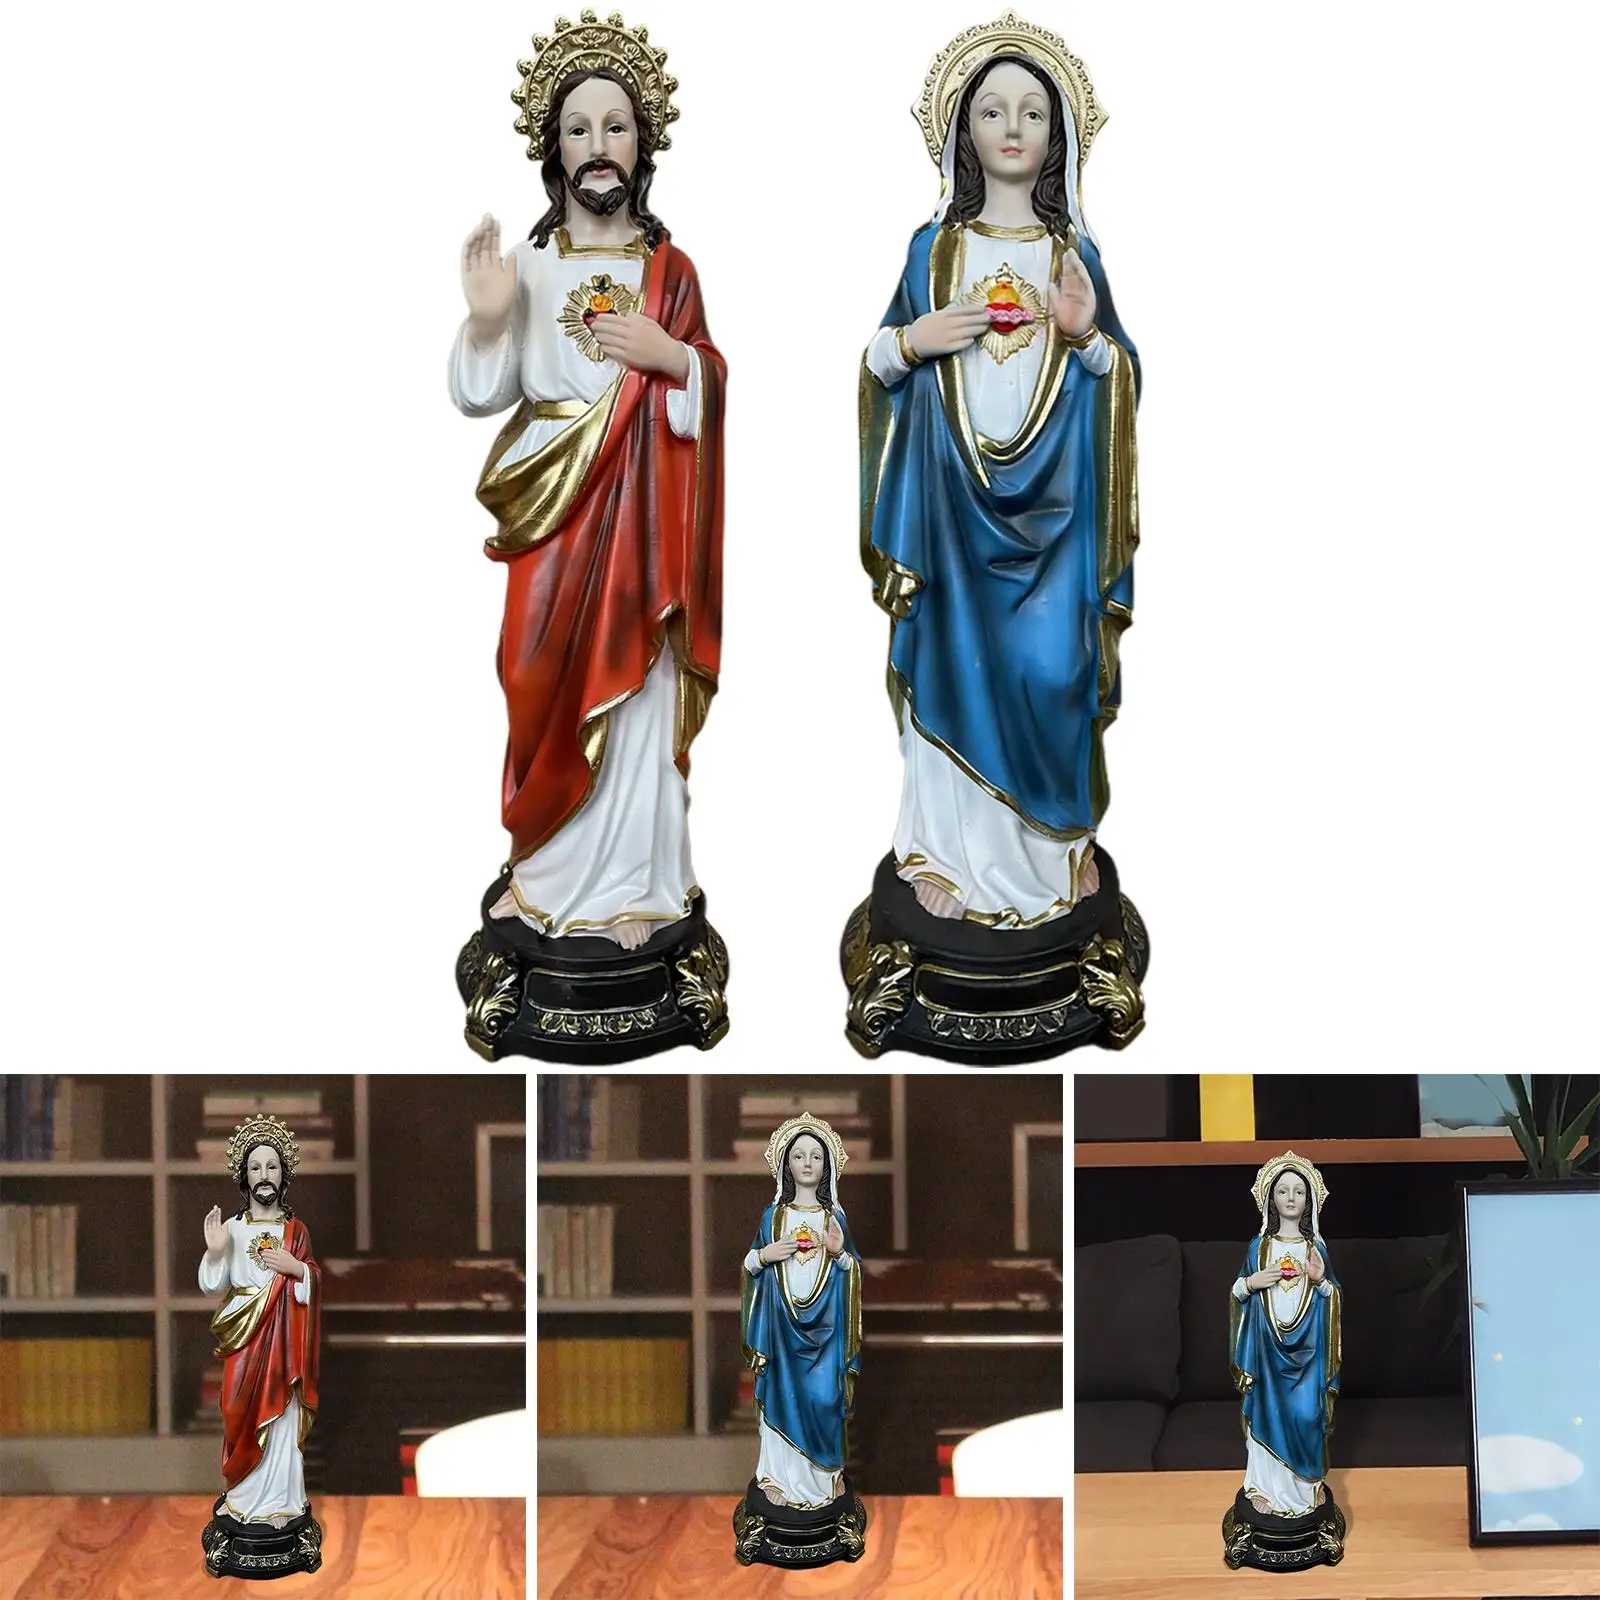 Savior Figurine Collection Christian Religious Gift Statuette Decorative Resin for Table Living Room Chapel Ornament Gift